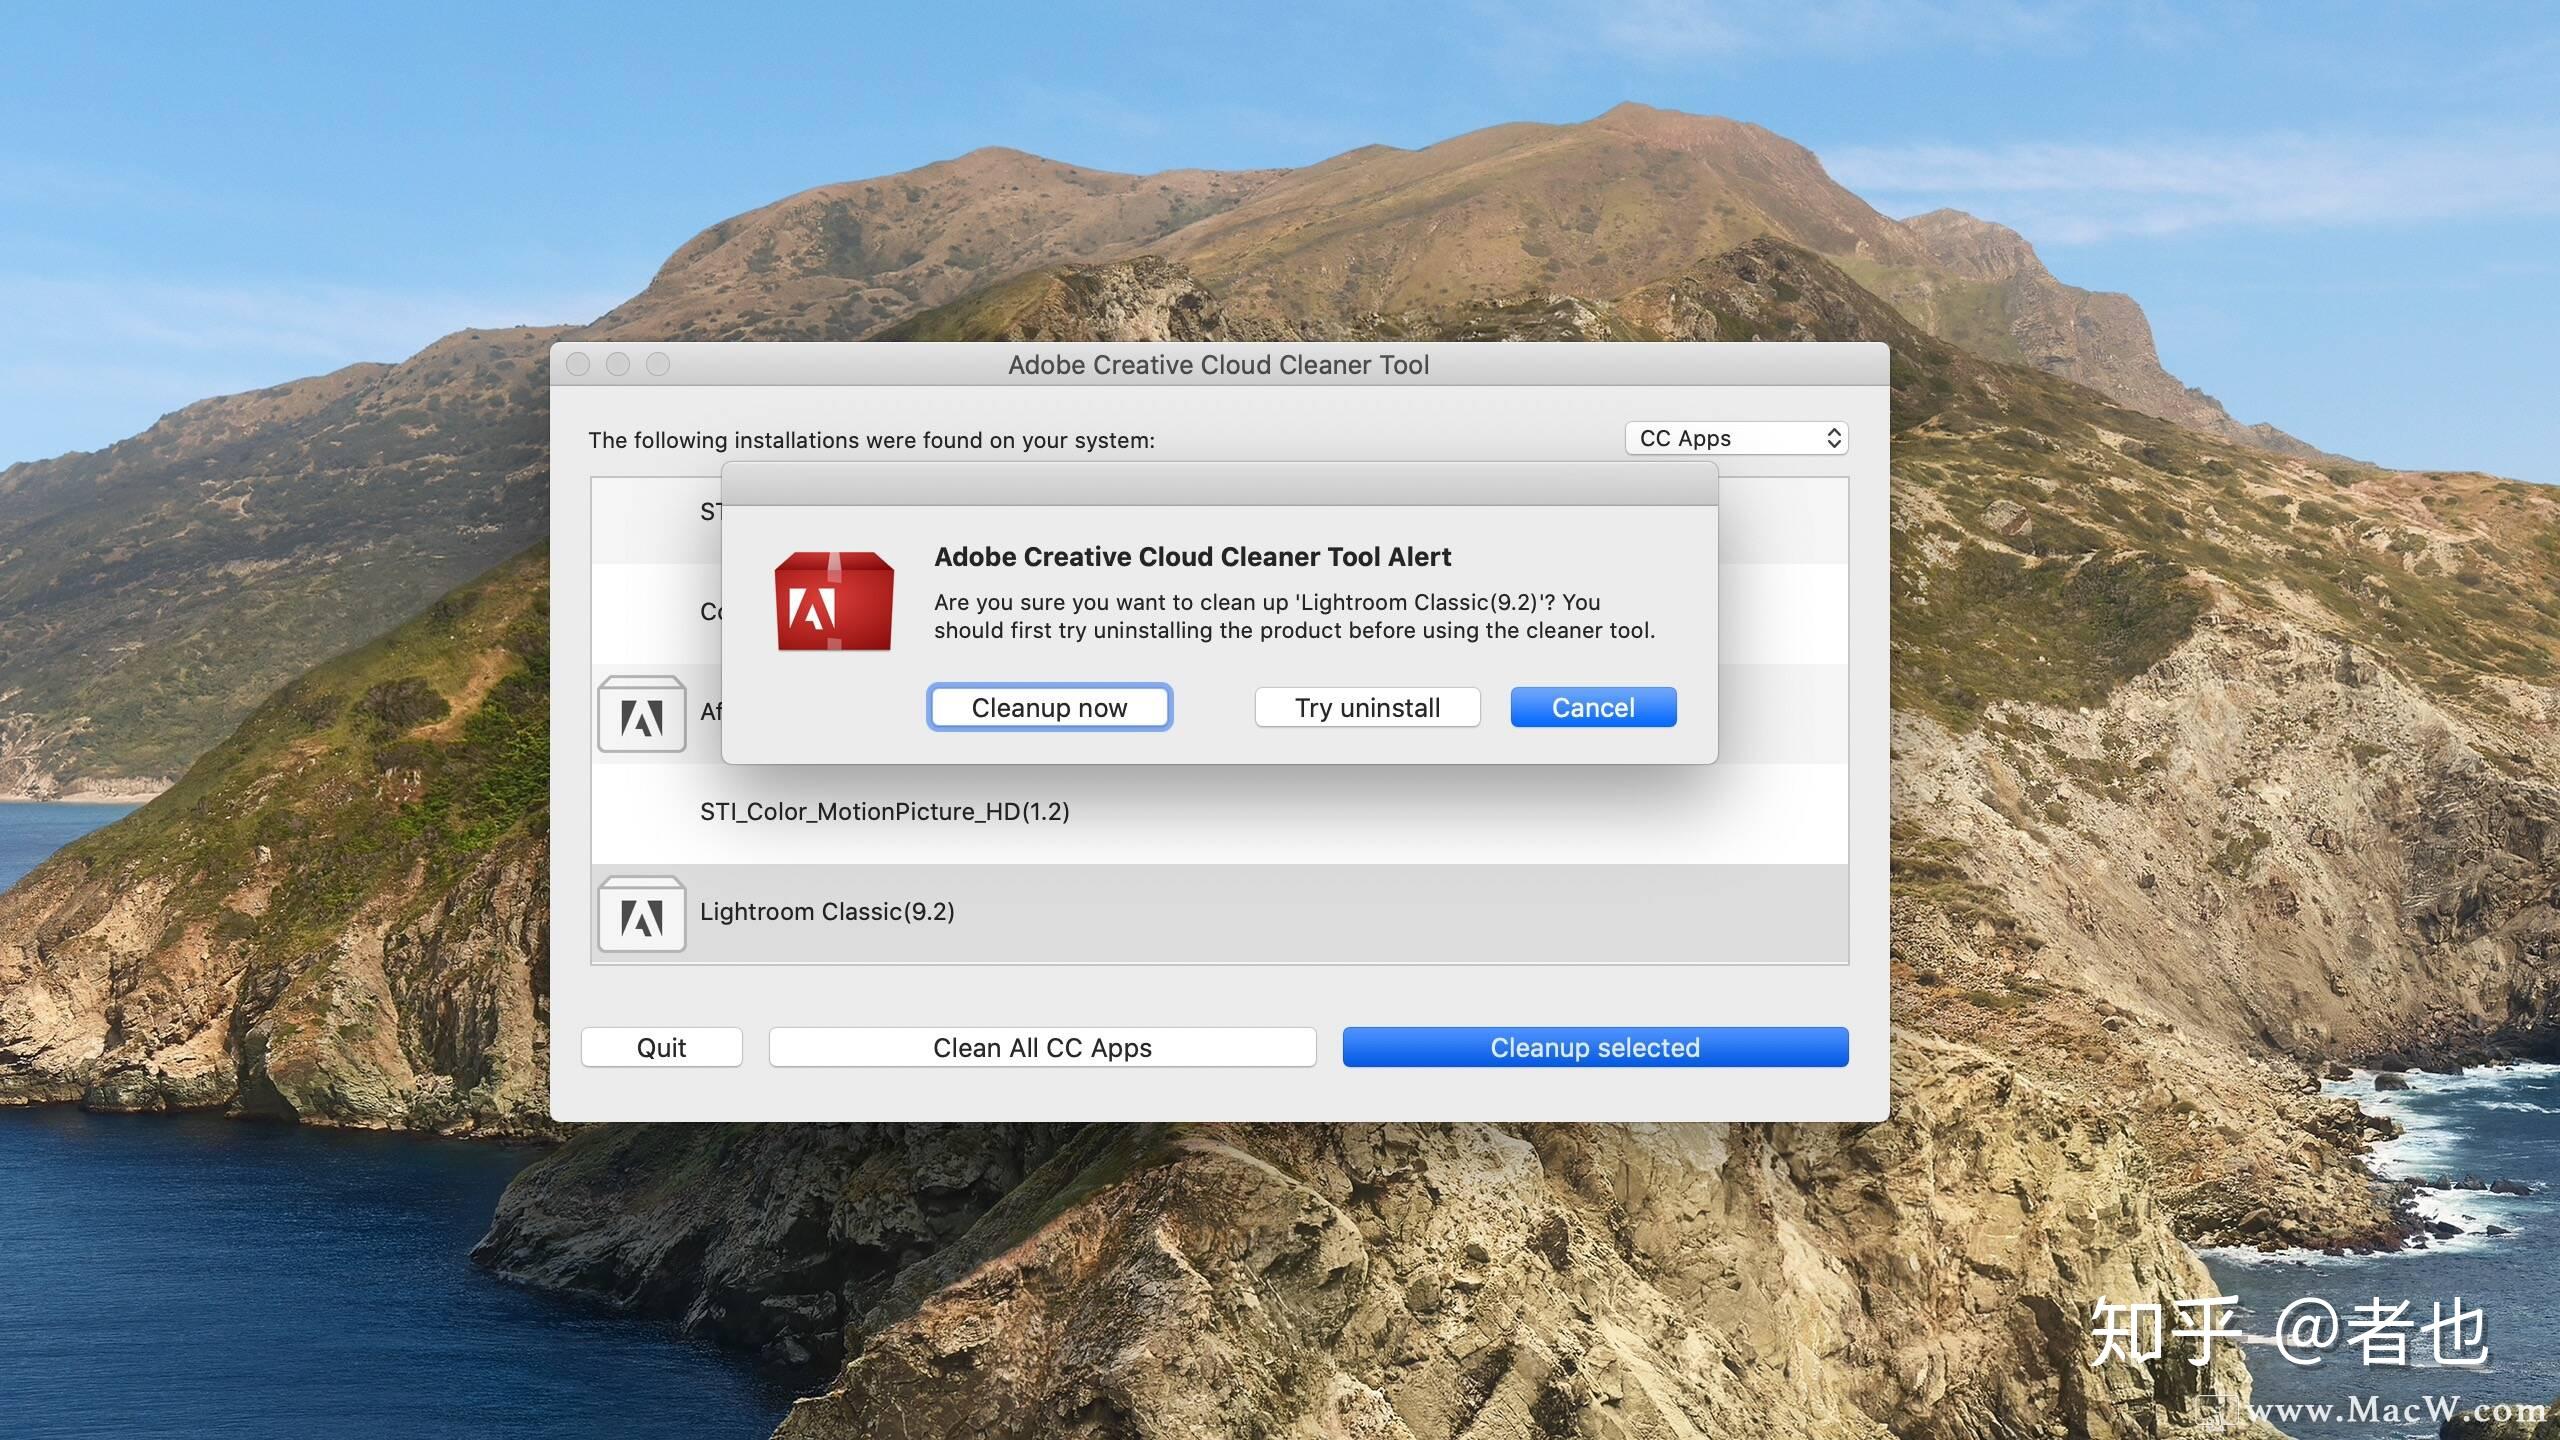 Adobe Creative Cloud Cleaner Tool 4.3.0.395 download the new version for mac